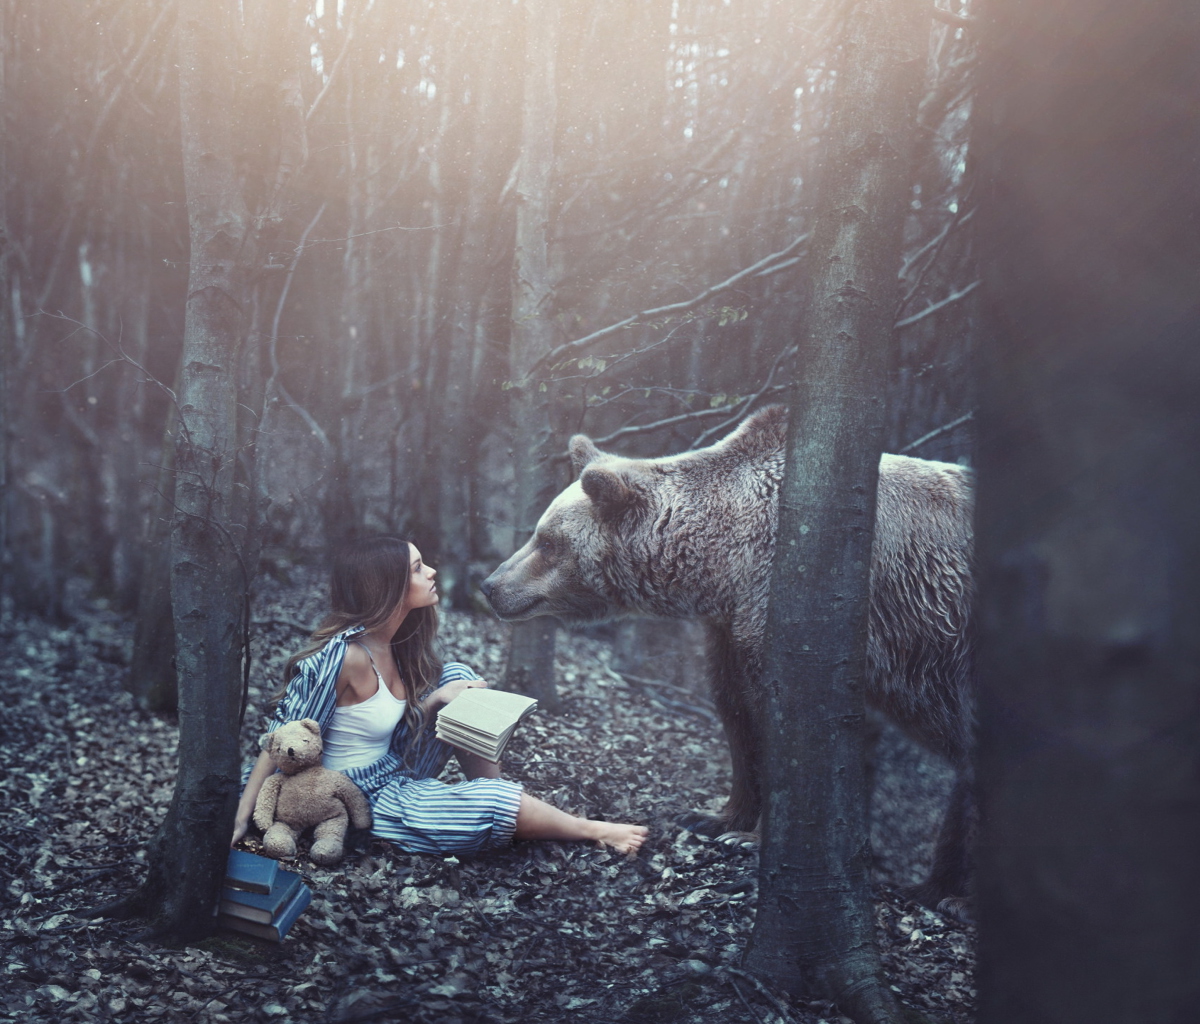 Girl And Two Bears In Forest By Rosie Hardy Photographer screenshot #1 1200x1024